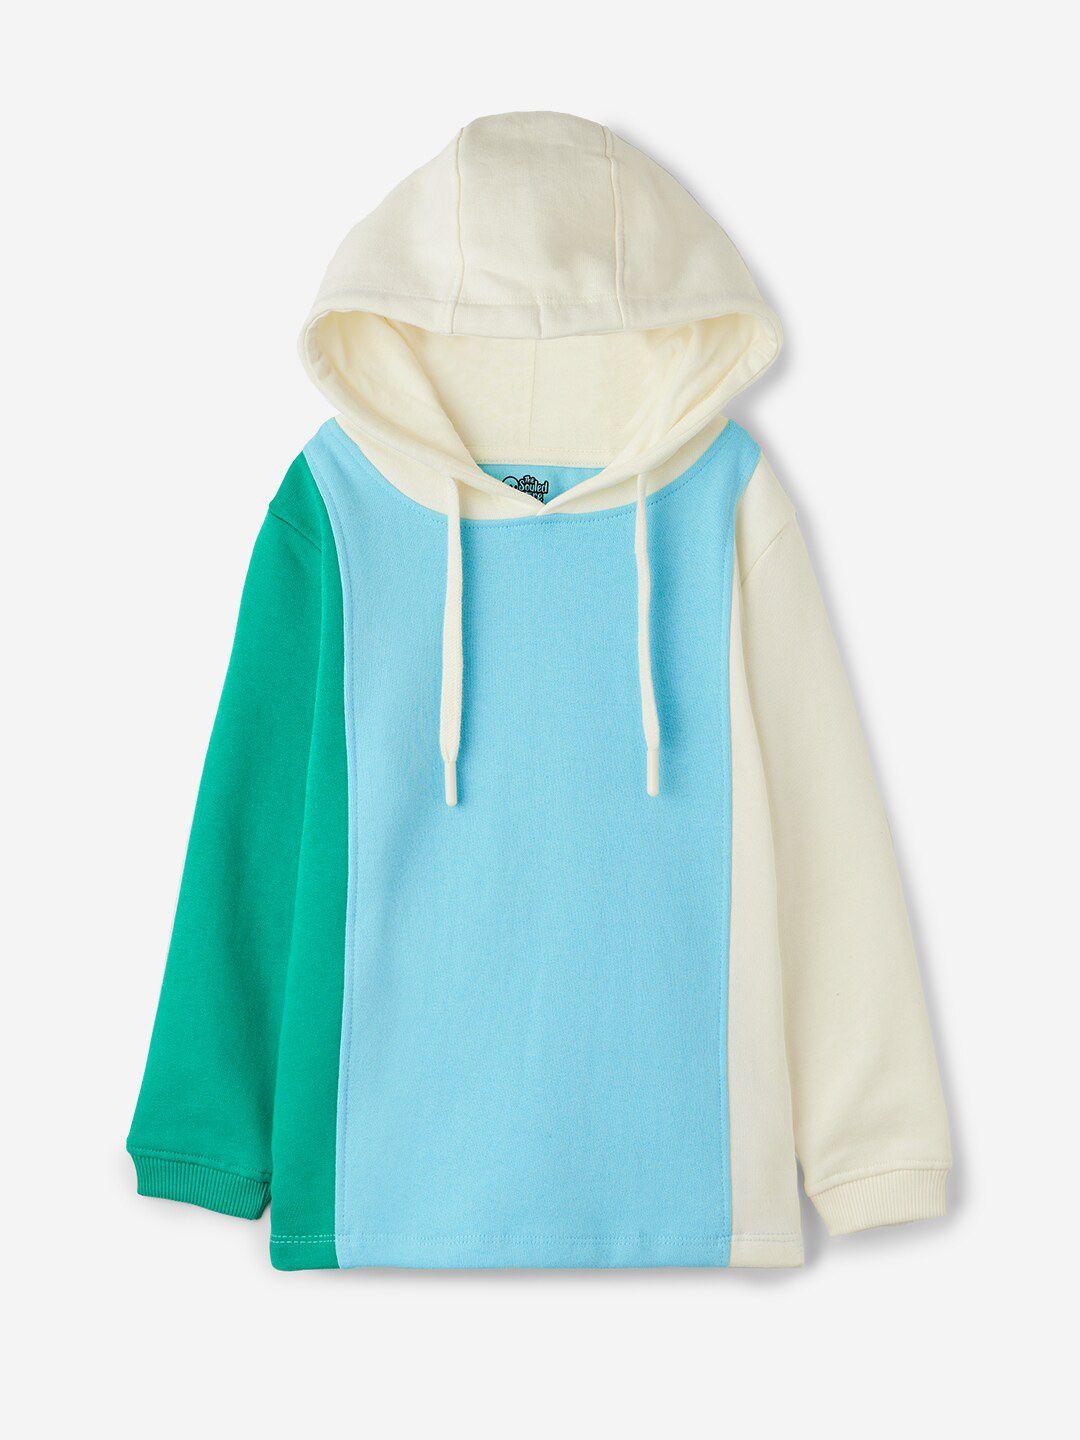 the souled store boys colourblocked hooded pure cotton pullover sweatshirt